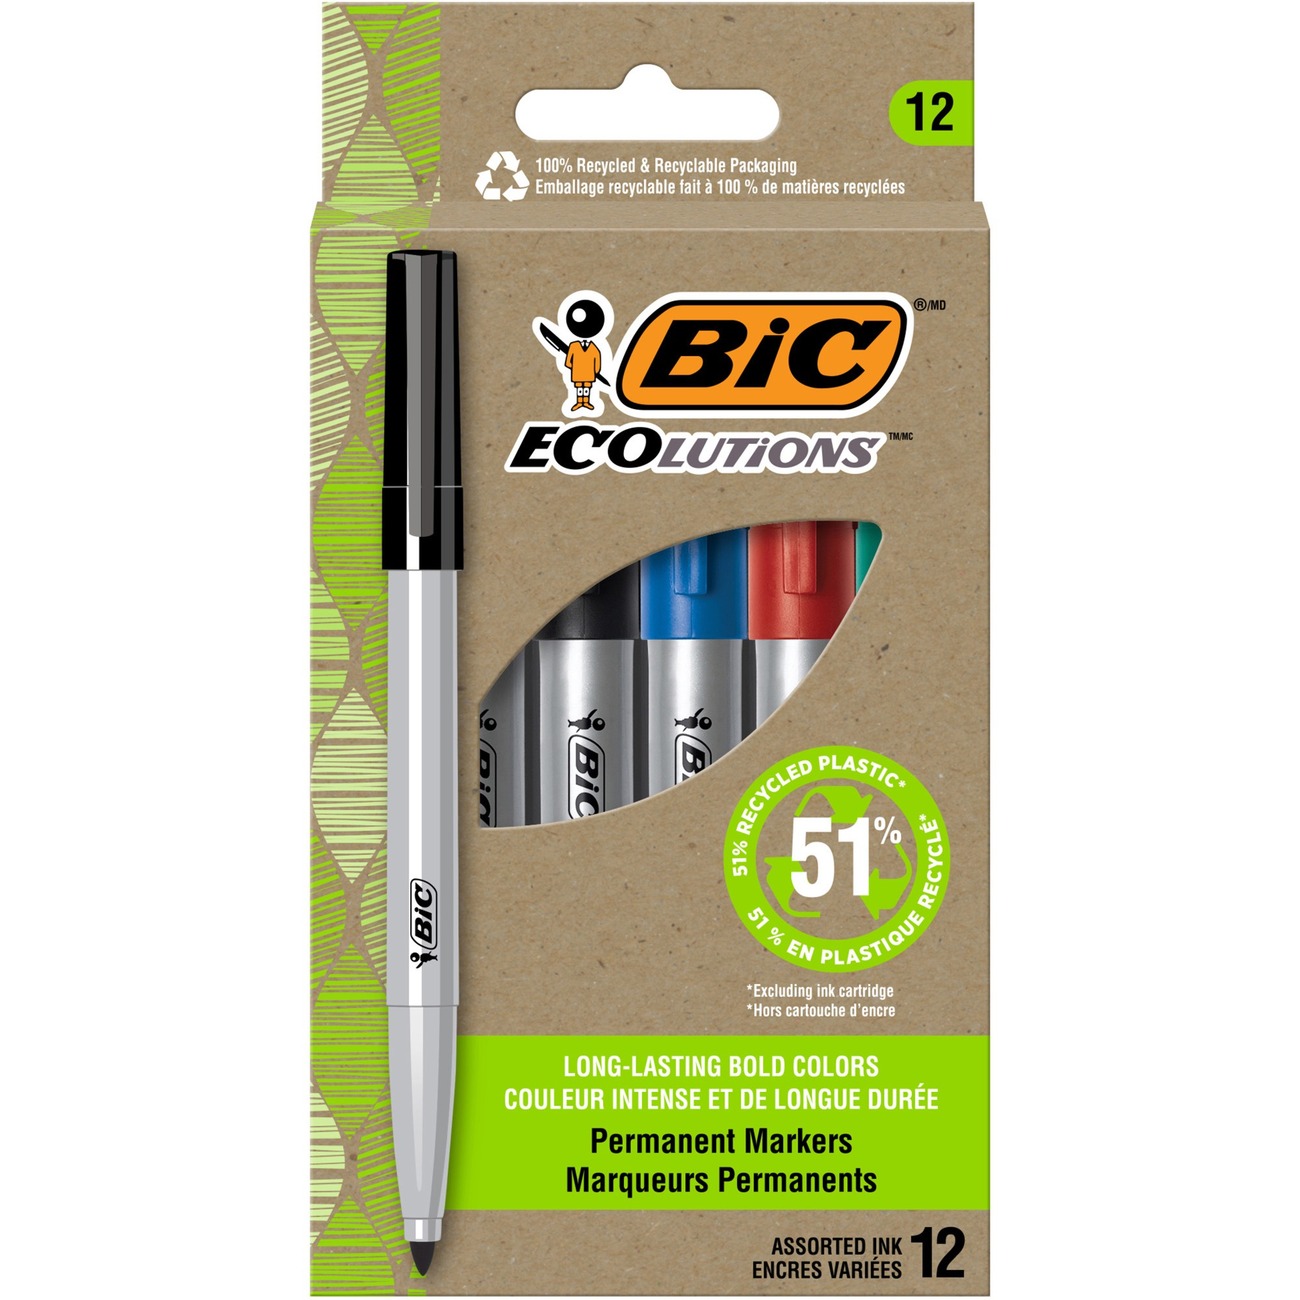 100P Fine Line Paint Markers - Visual Workplace, Inc.